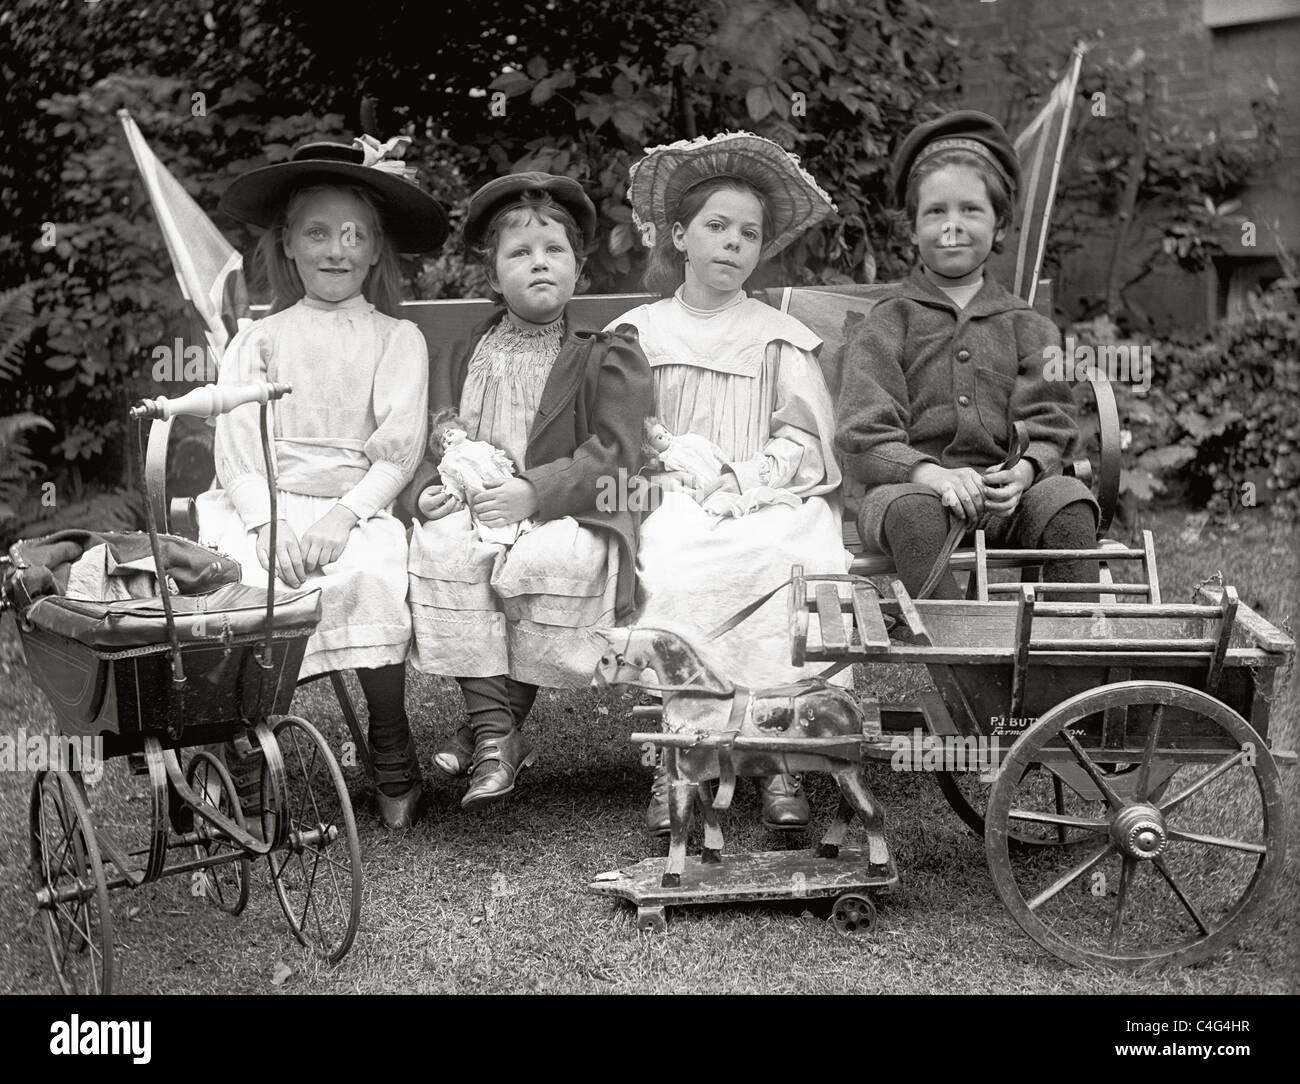 Original glass negative slide of privileged upper class Victorian or Edwardian children sitting in garden with many toys Stock Photo